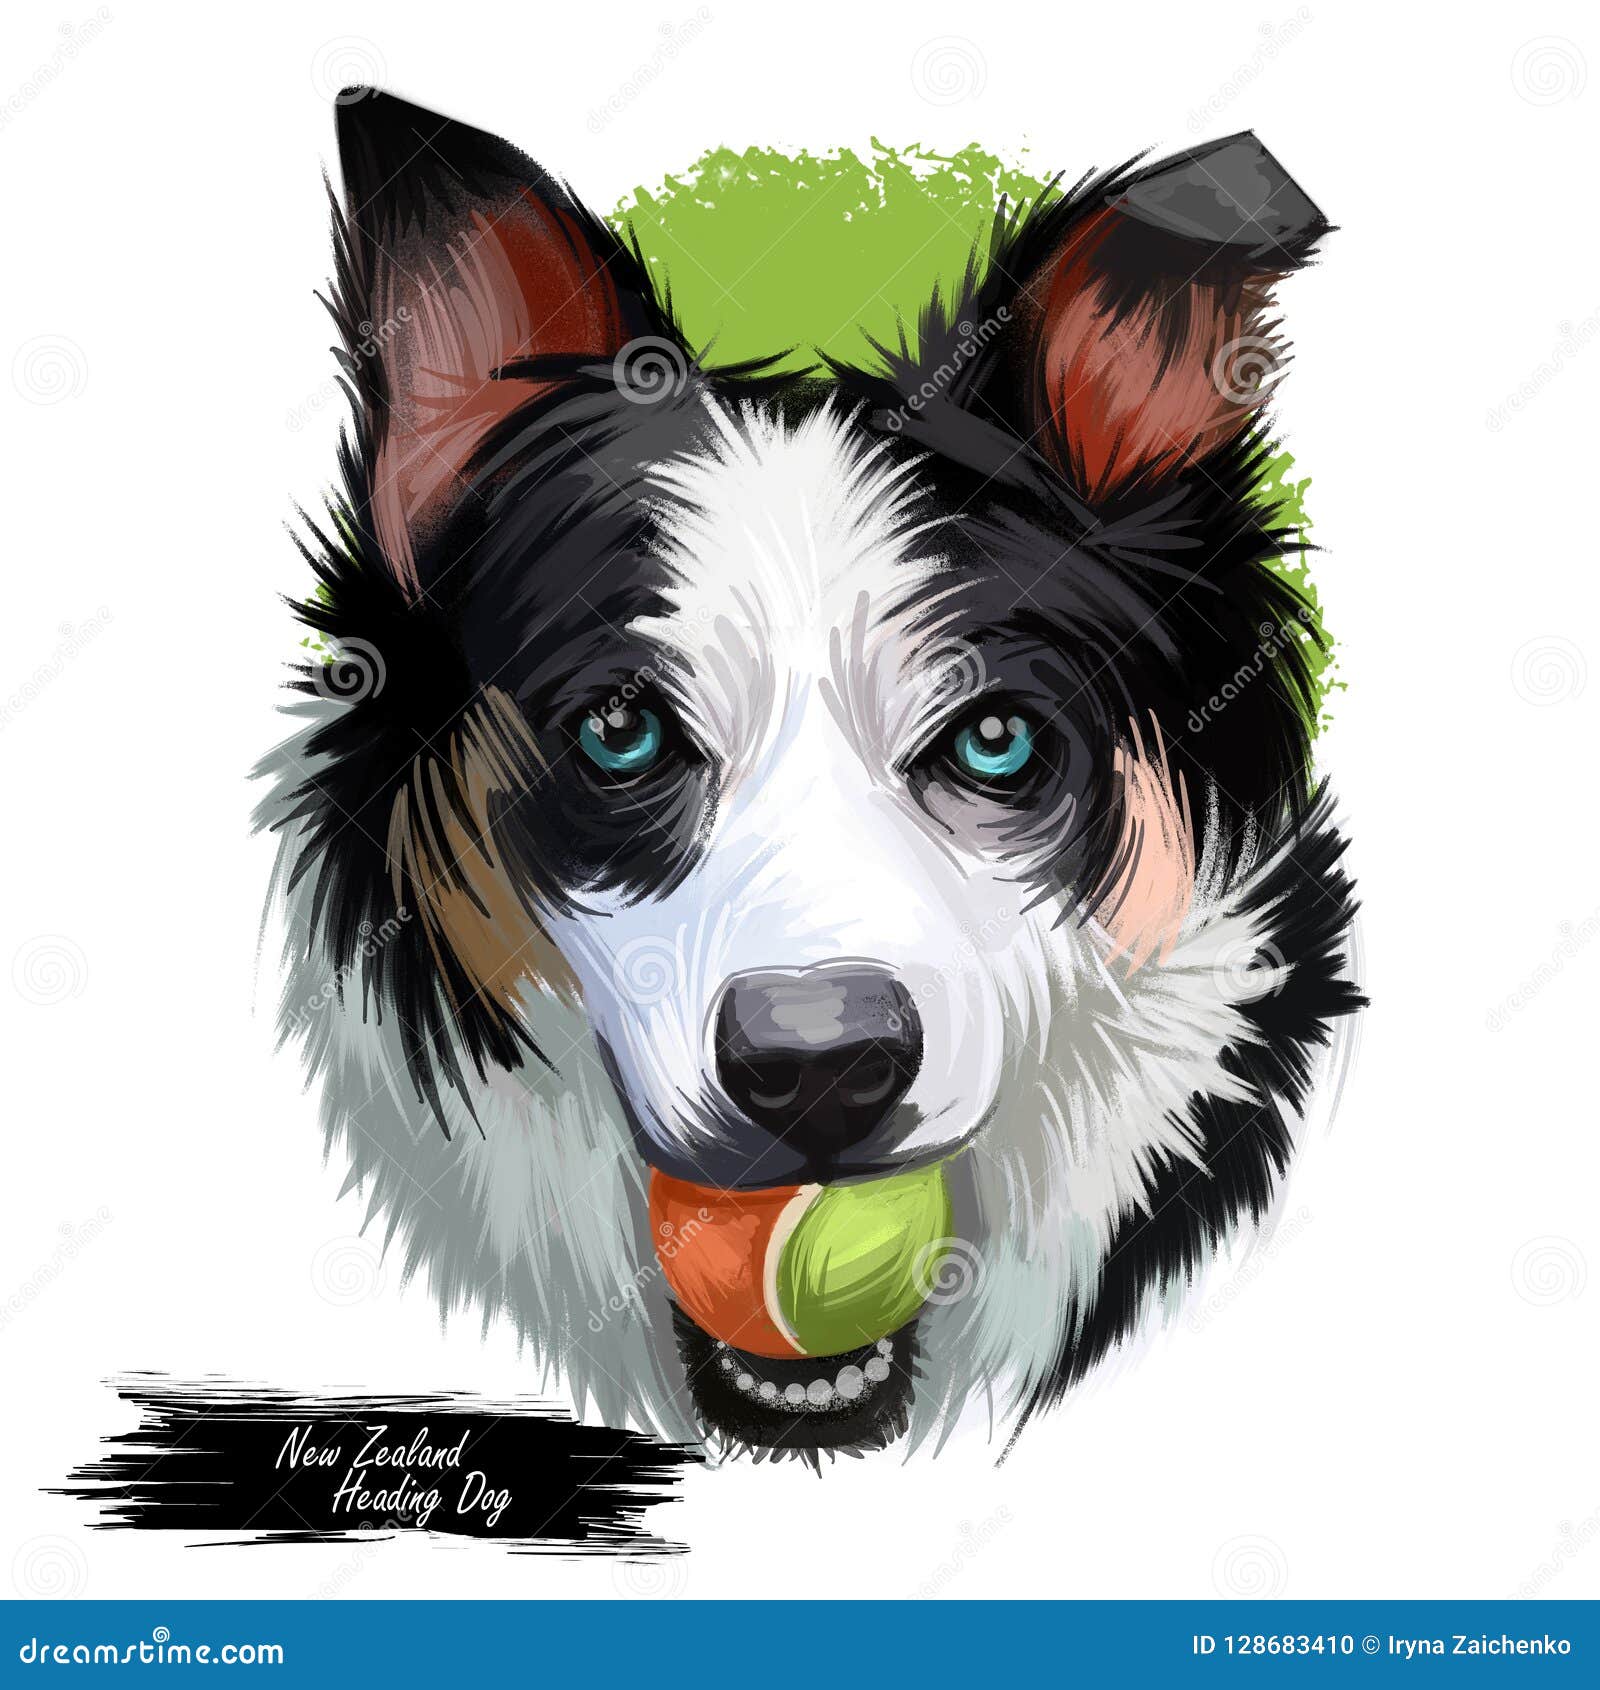 New Zealand Heading Dog Poster Digital Art Isolated Waterclor Portrait Of Puppy Holding Ball In Teeth Playing Doggy Stock Illustration Illustration Of Furry Nose 128683410